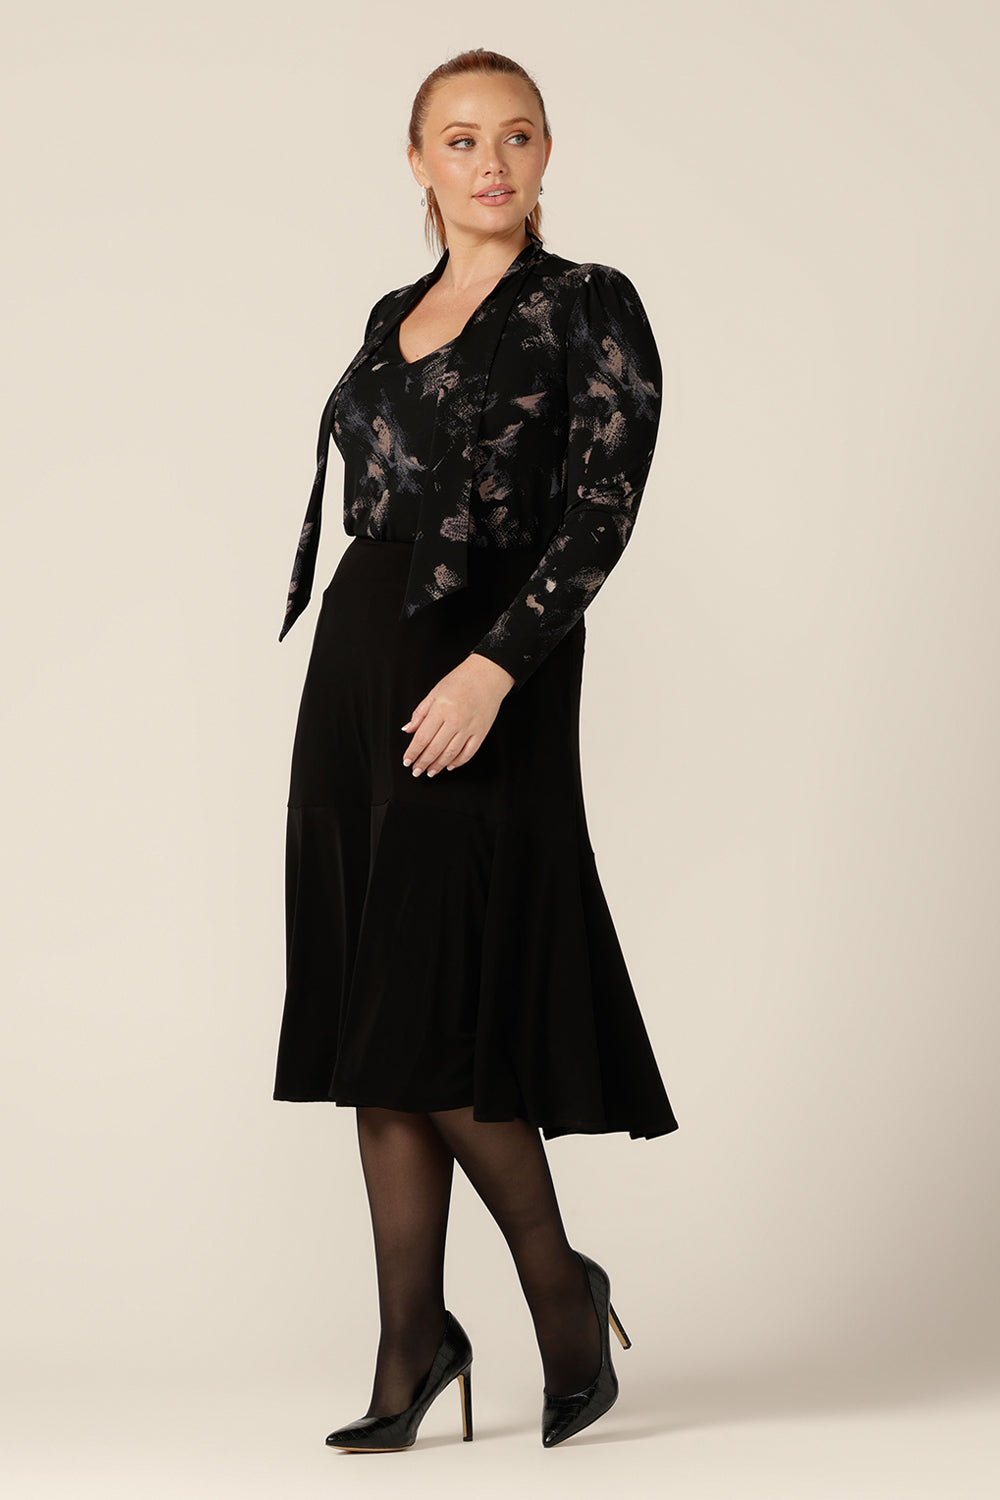 A curvy, size 12 woman wears a long sleeve, V-neck top with tie neck detail with a flared, knee-length black skirt. Both are by Australian and New Zealand women's fashion brand L&F and available to buy in an inclusive size range of 8 to 24.